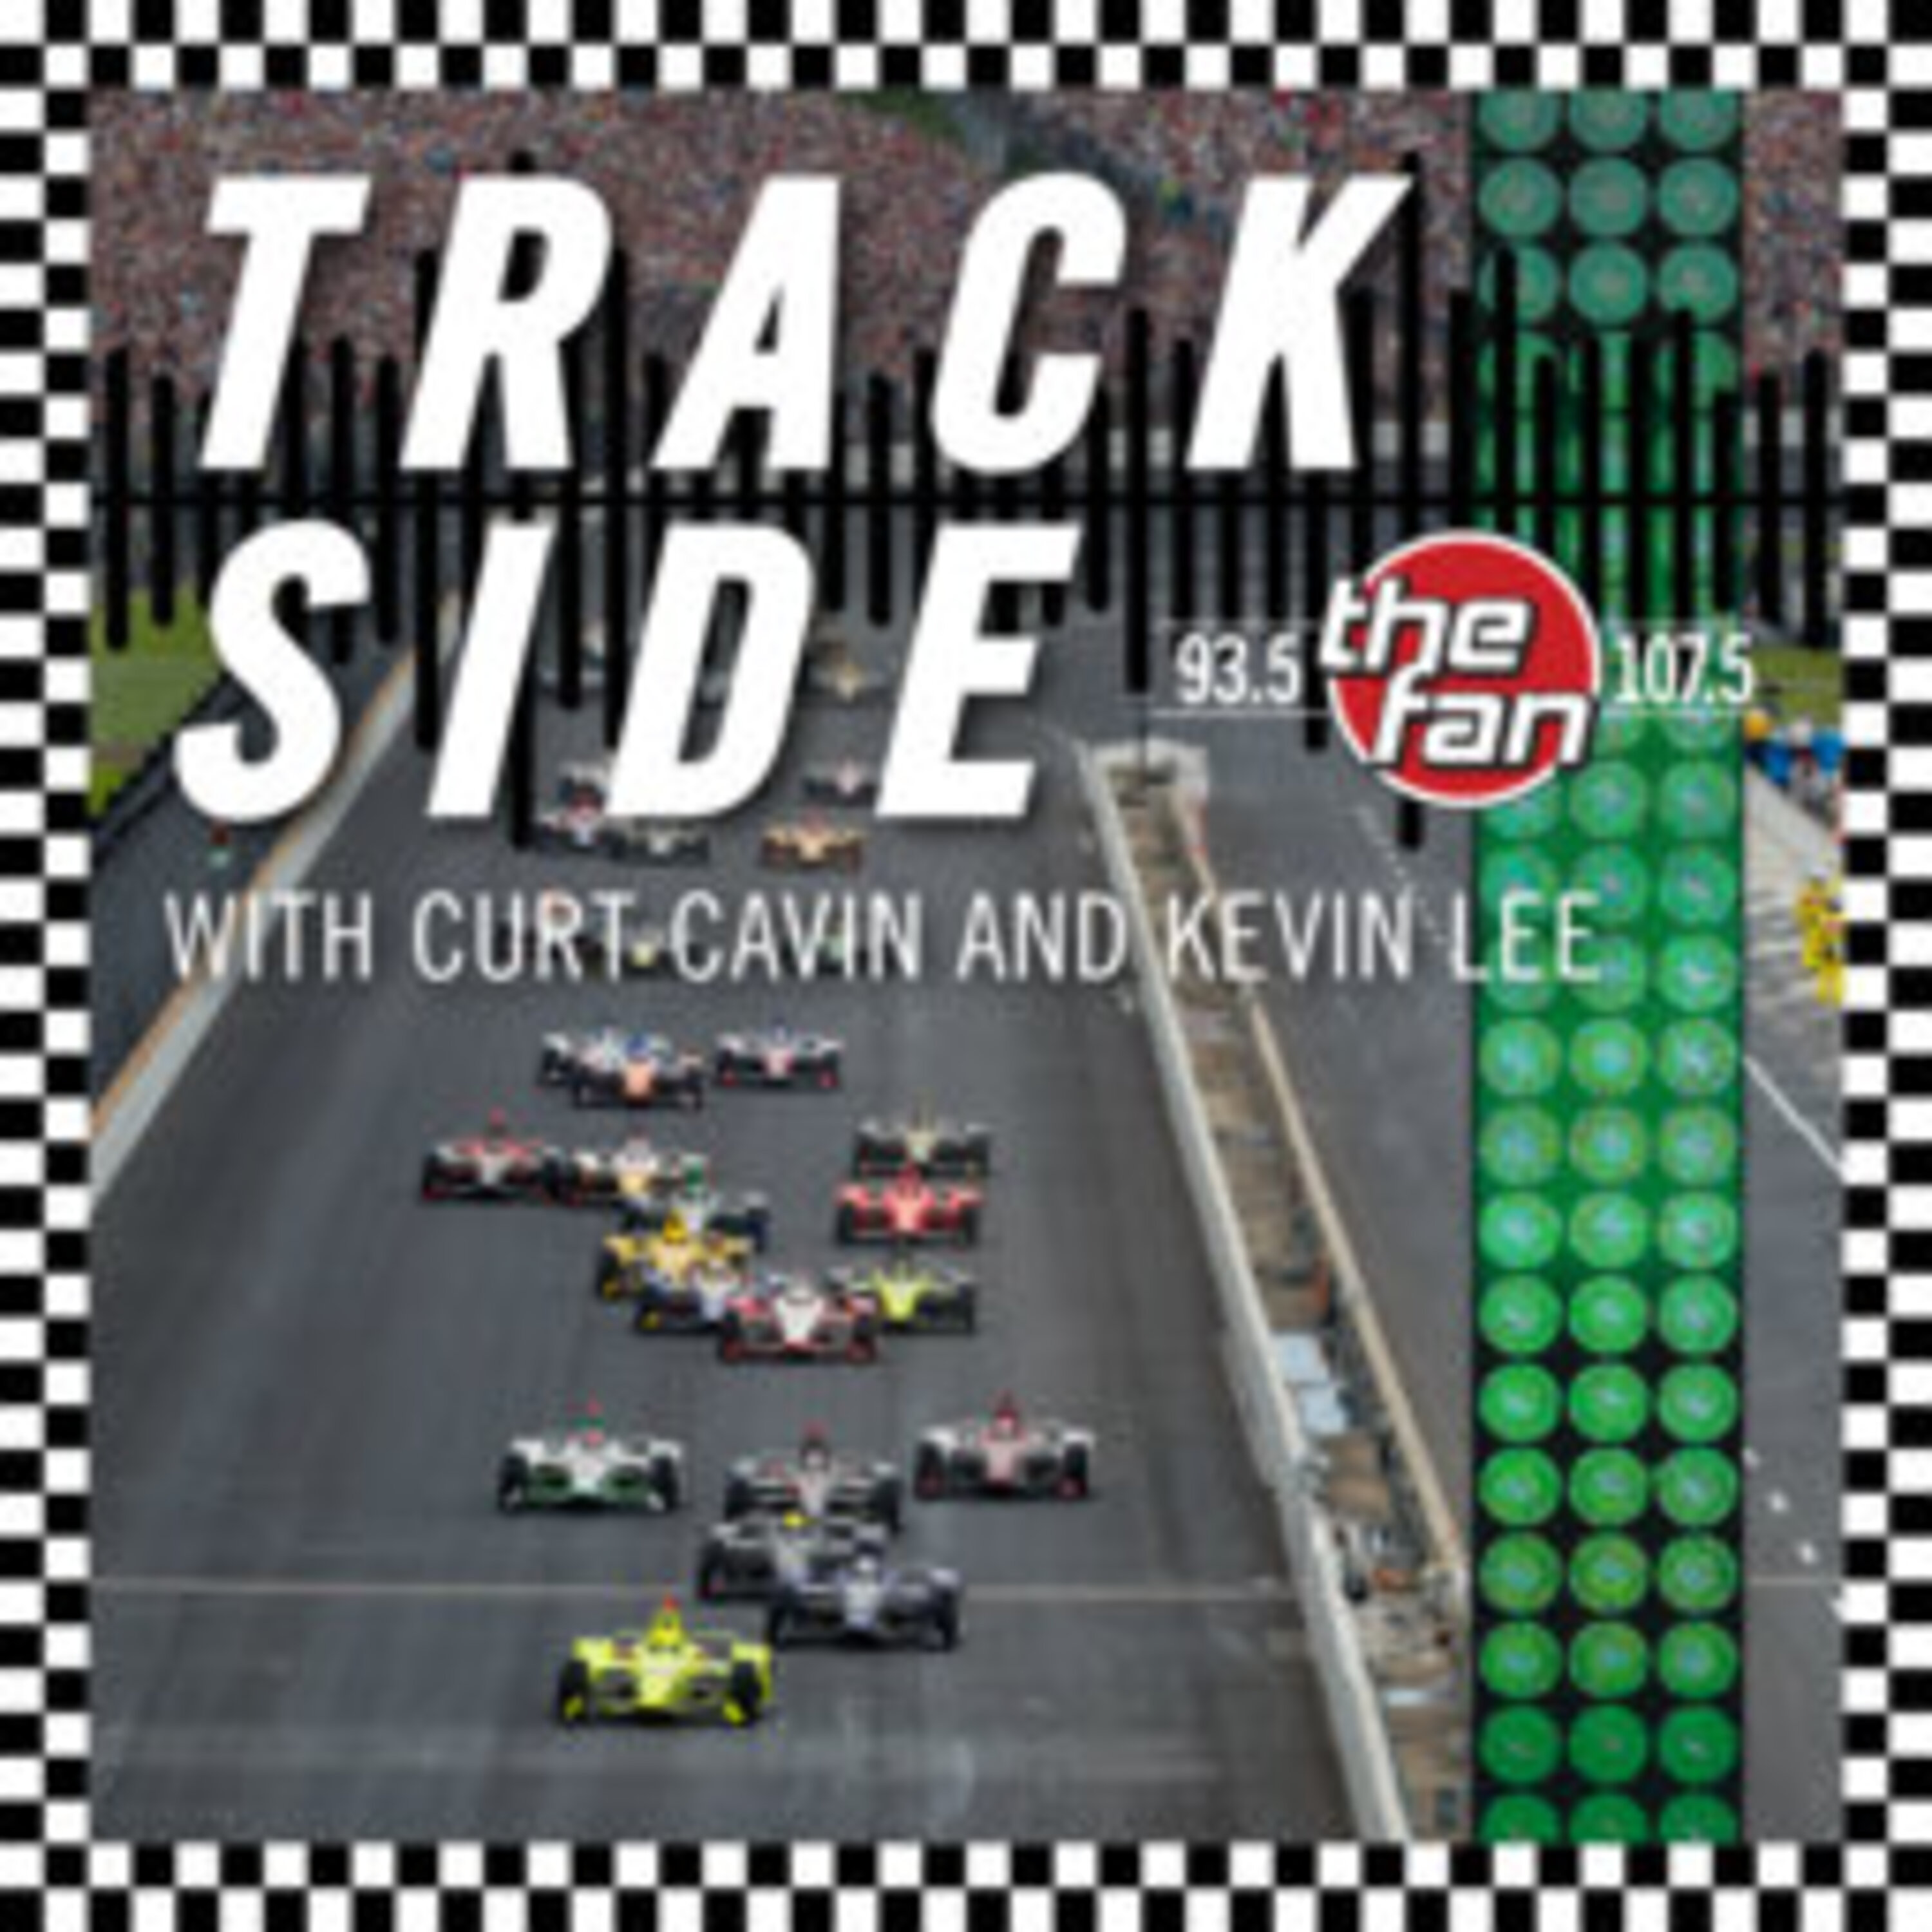 Curt and Kevin Talk Toronto, Championship Standings, Brickyard 400, and more!